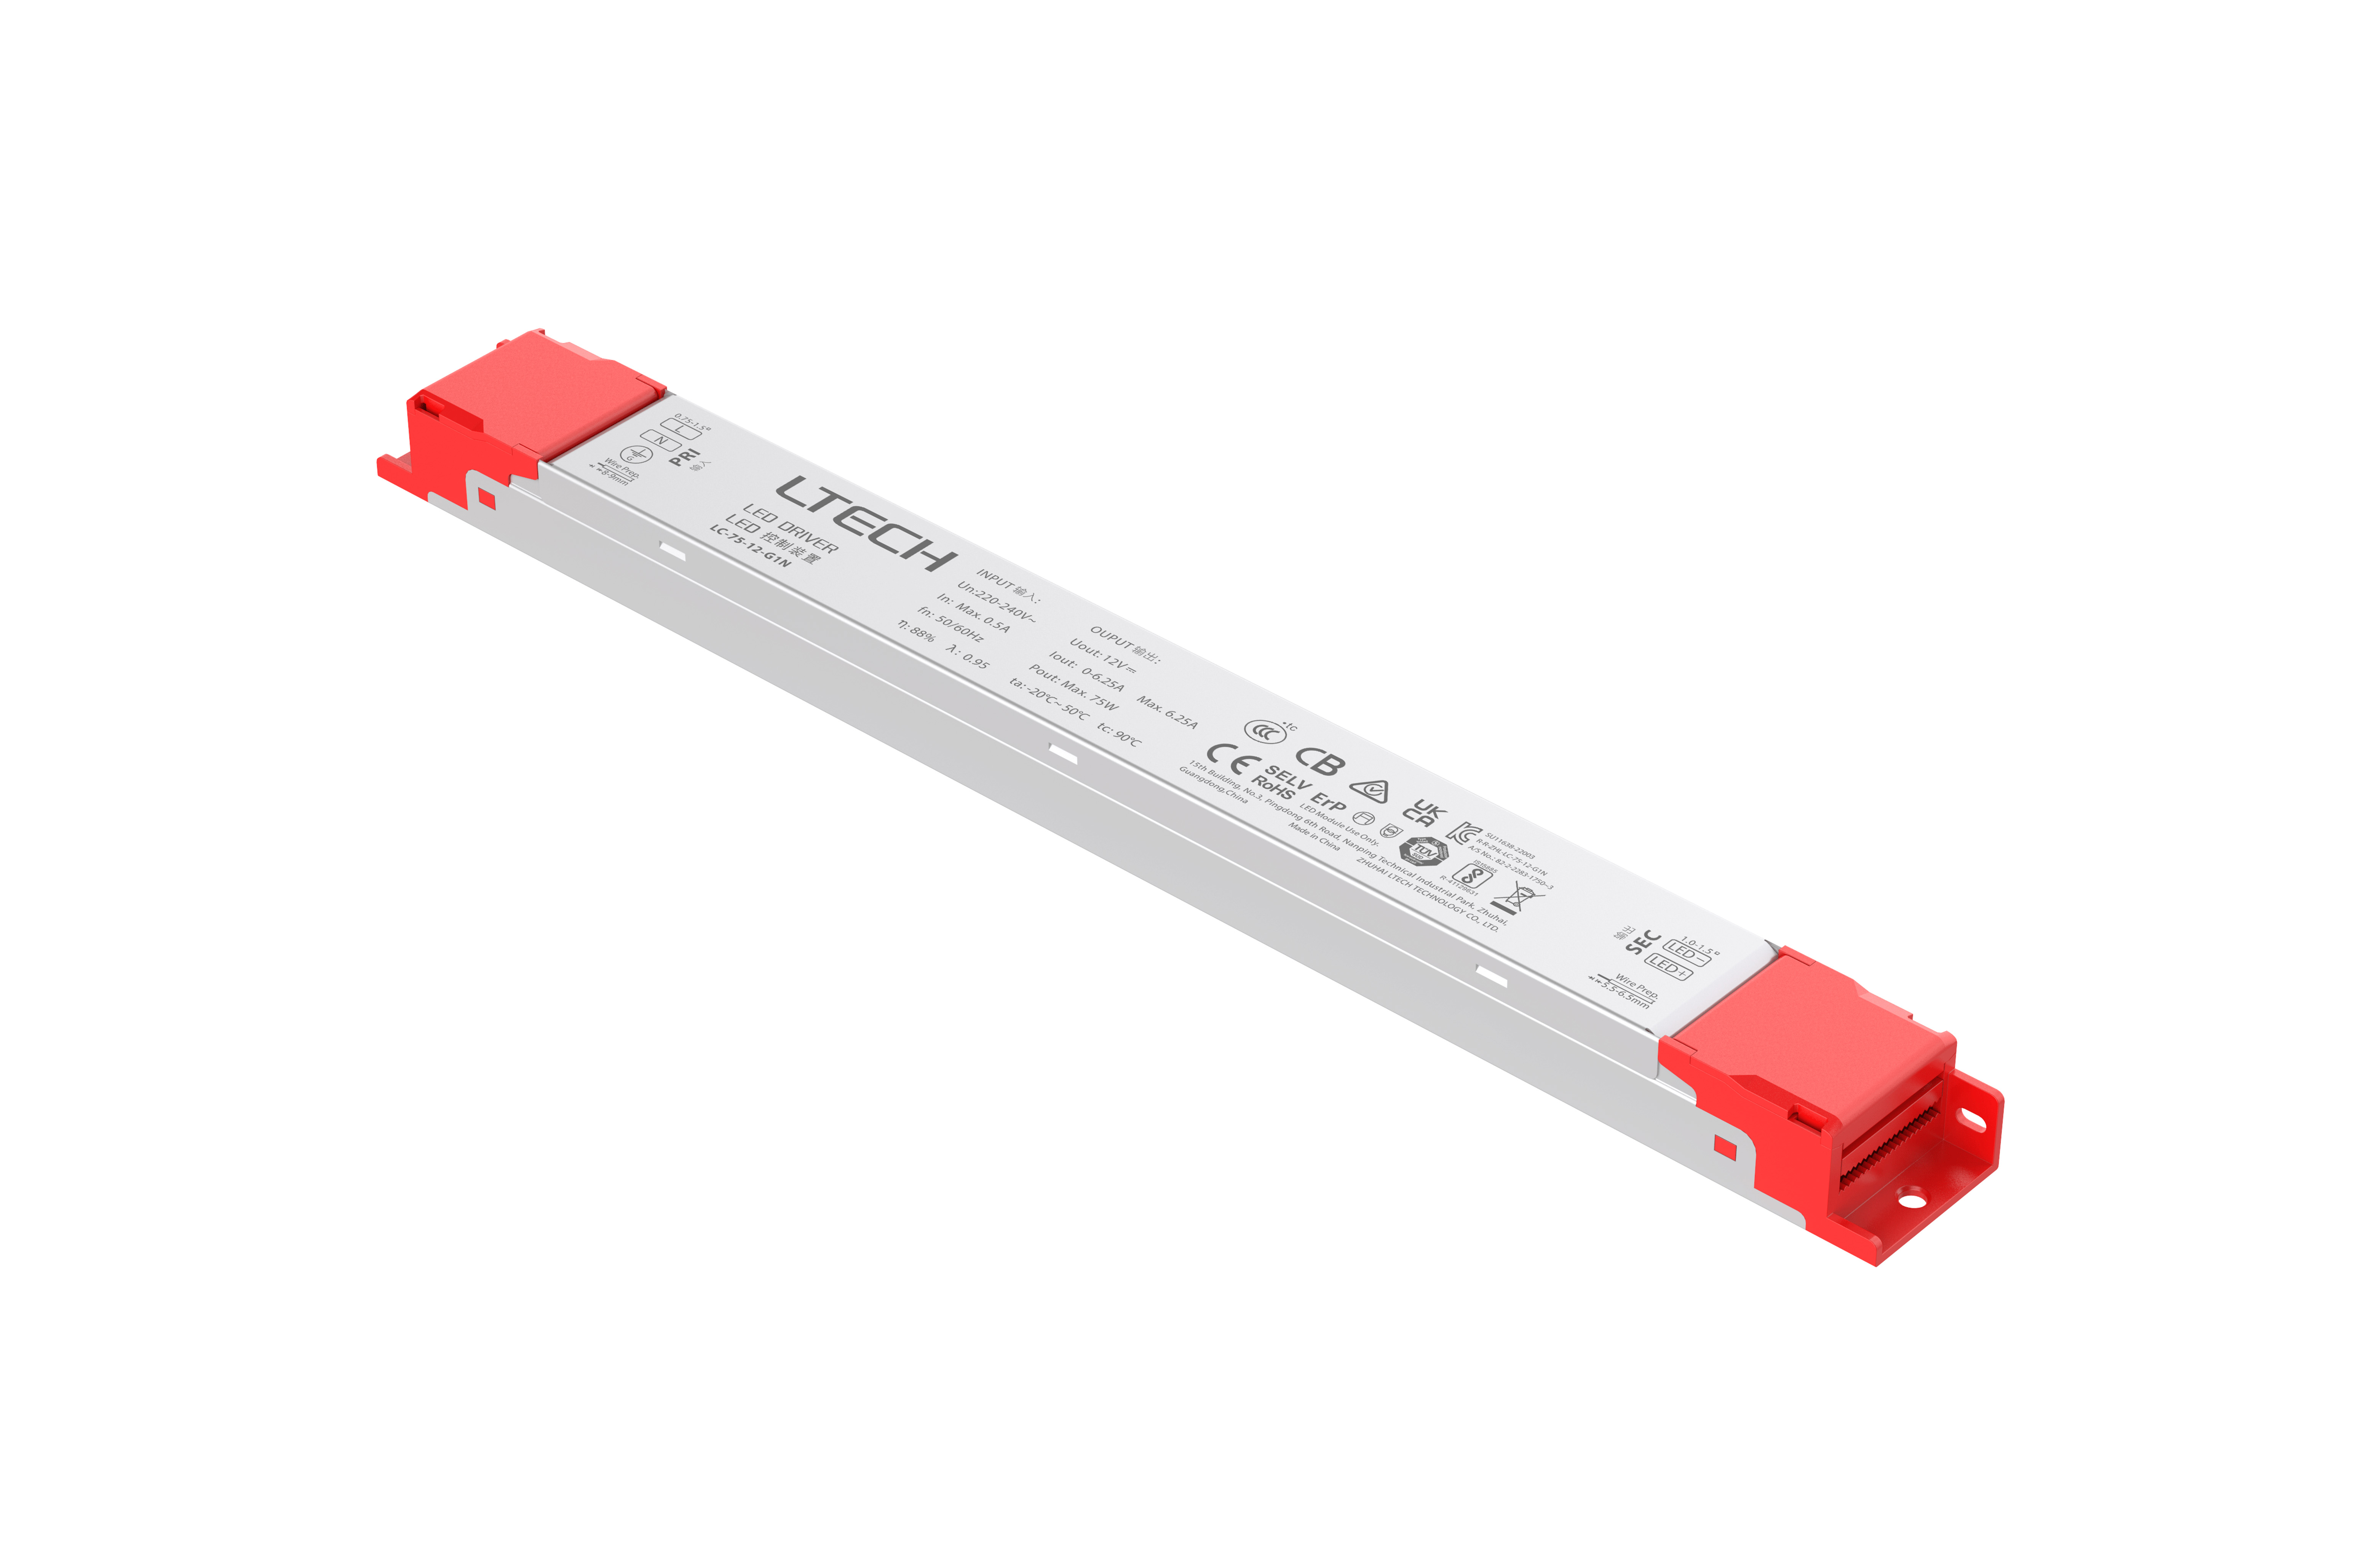 LC-75-12-G1N  Intelligent Constant Voltage  LED Driver; ON/OFF; 75W; 12VDC 6.25A ; 220-240Vac; IP20; 5yrs Warrenty.